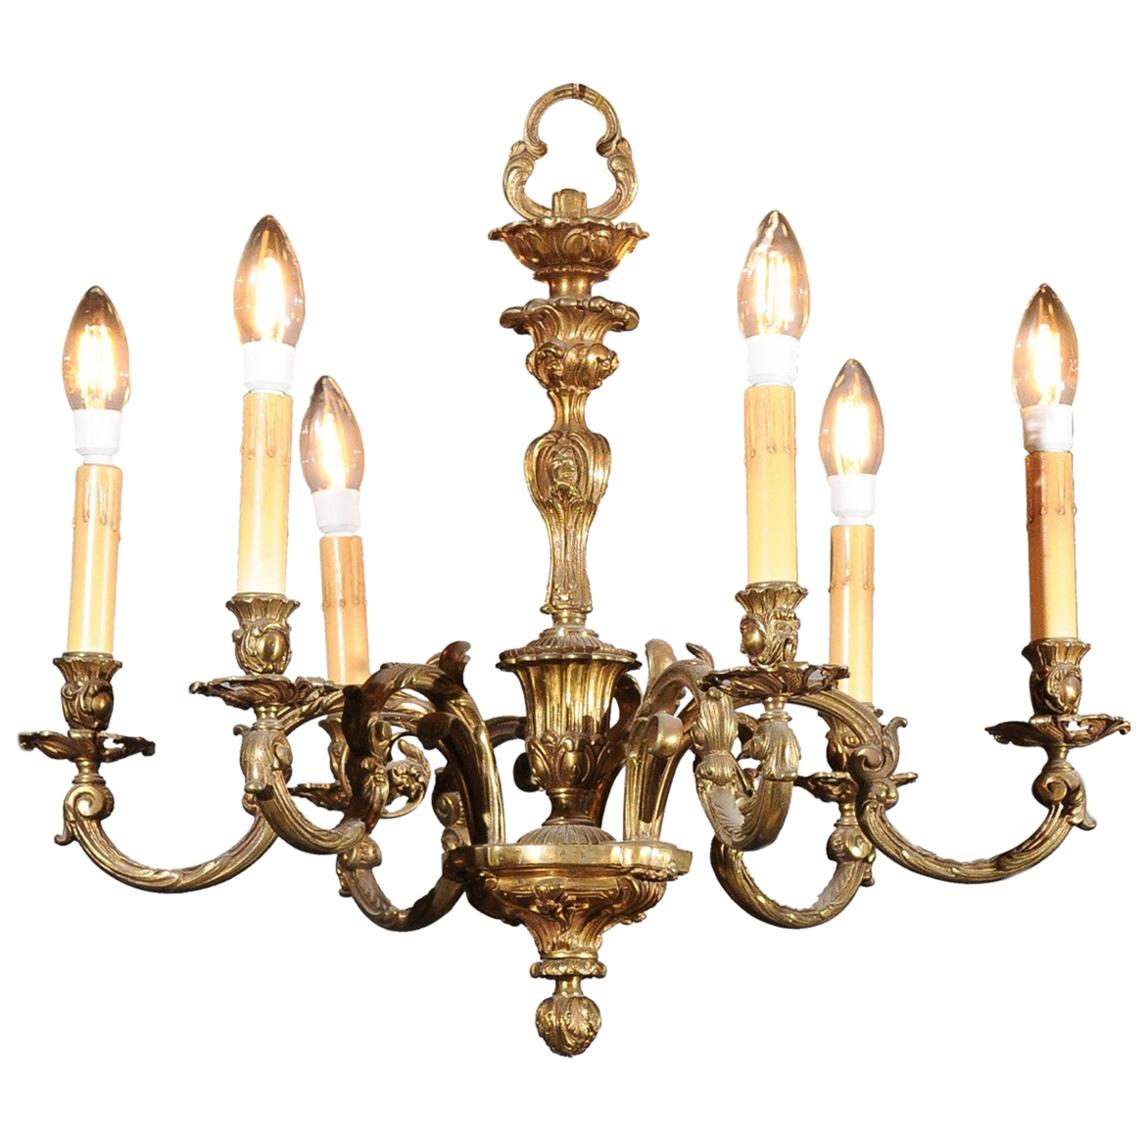 French 19th Century Six-Light Bronze Chandelier with Foliage and Scrolling Arms